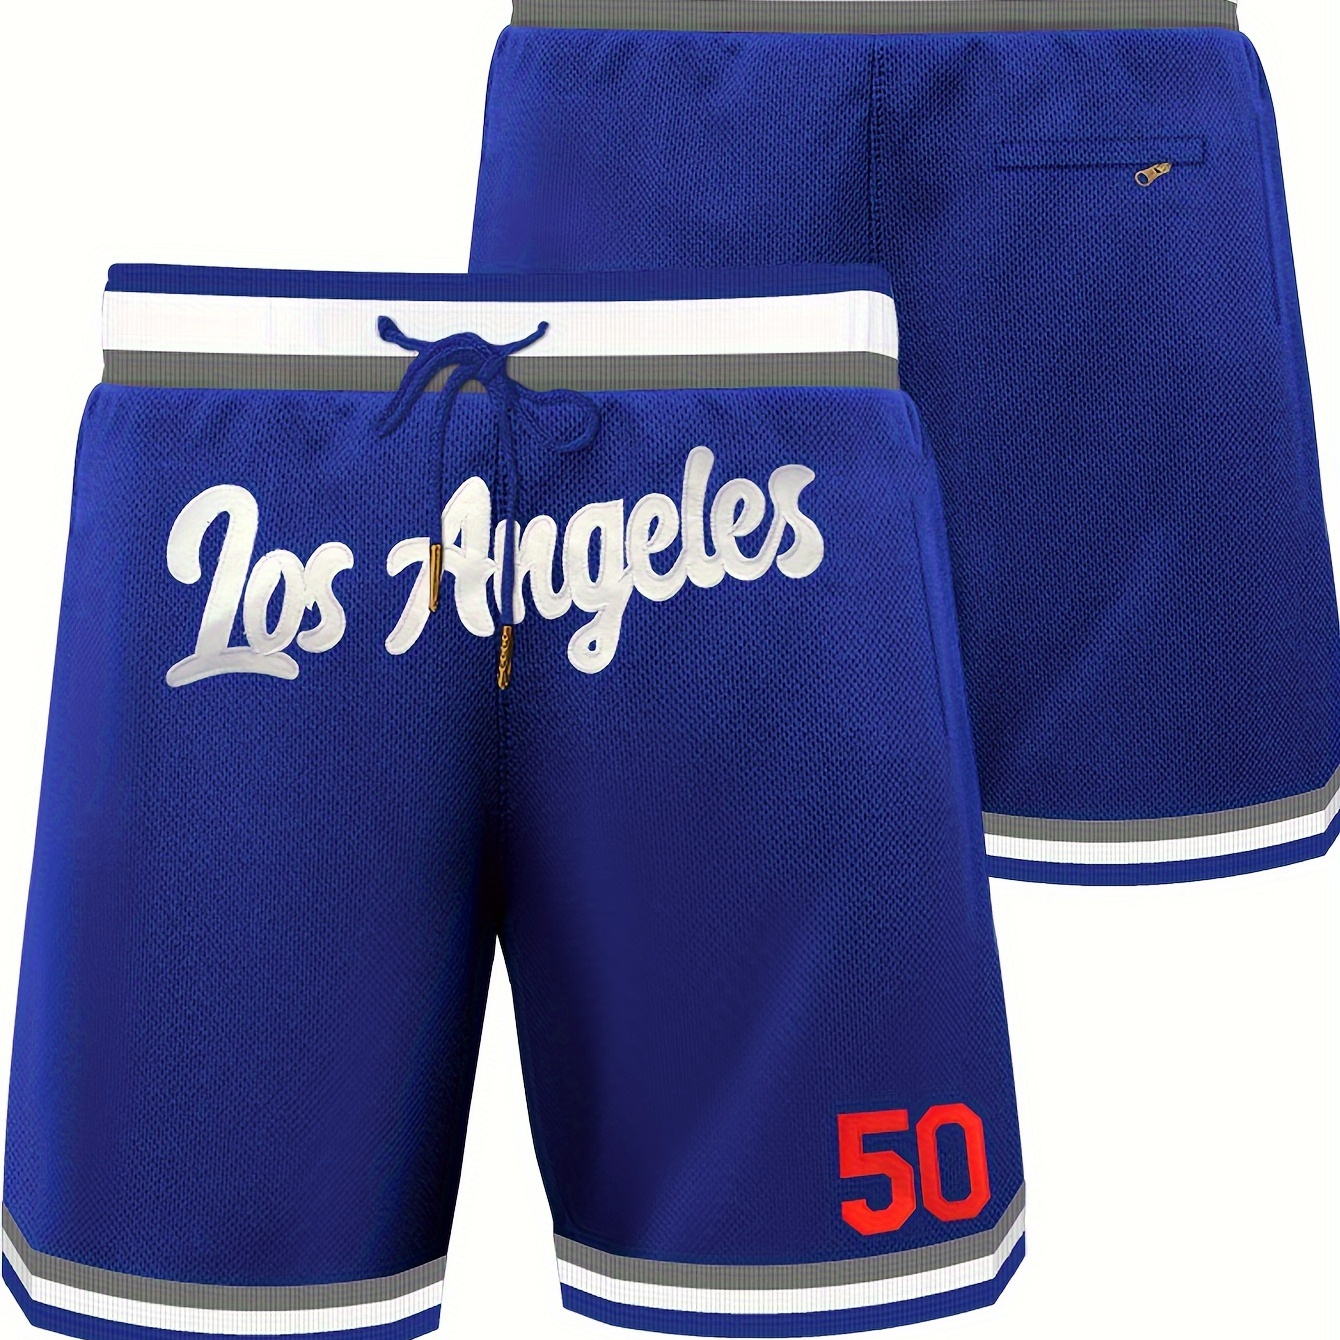 

Los Angeles 50 Embroidery Men's Quick Dry Loose Shorts, Active Color Block Drawstring Shorts For Basketball Training And Competition